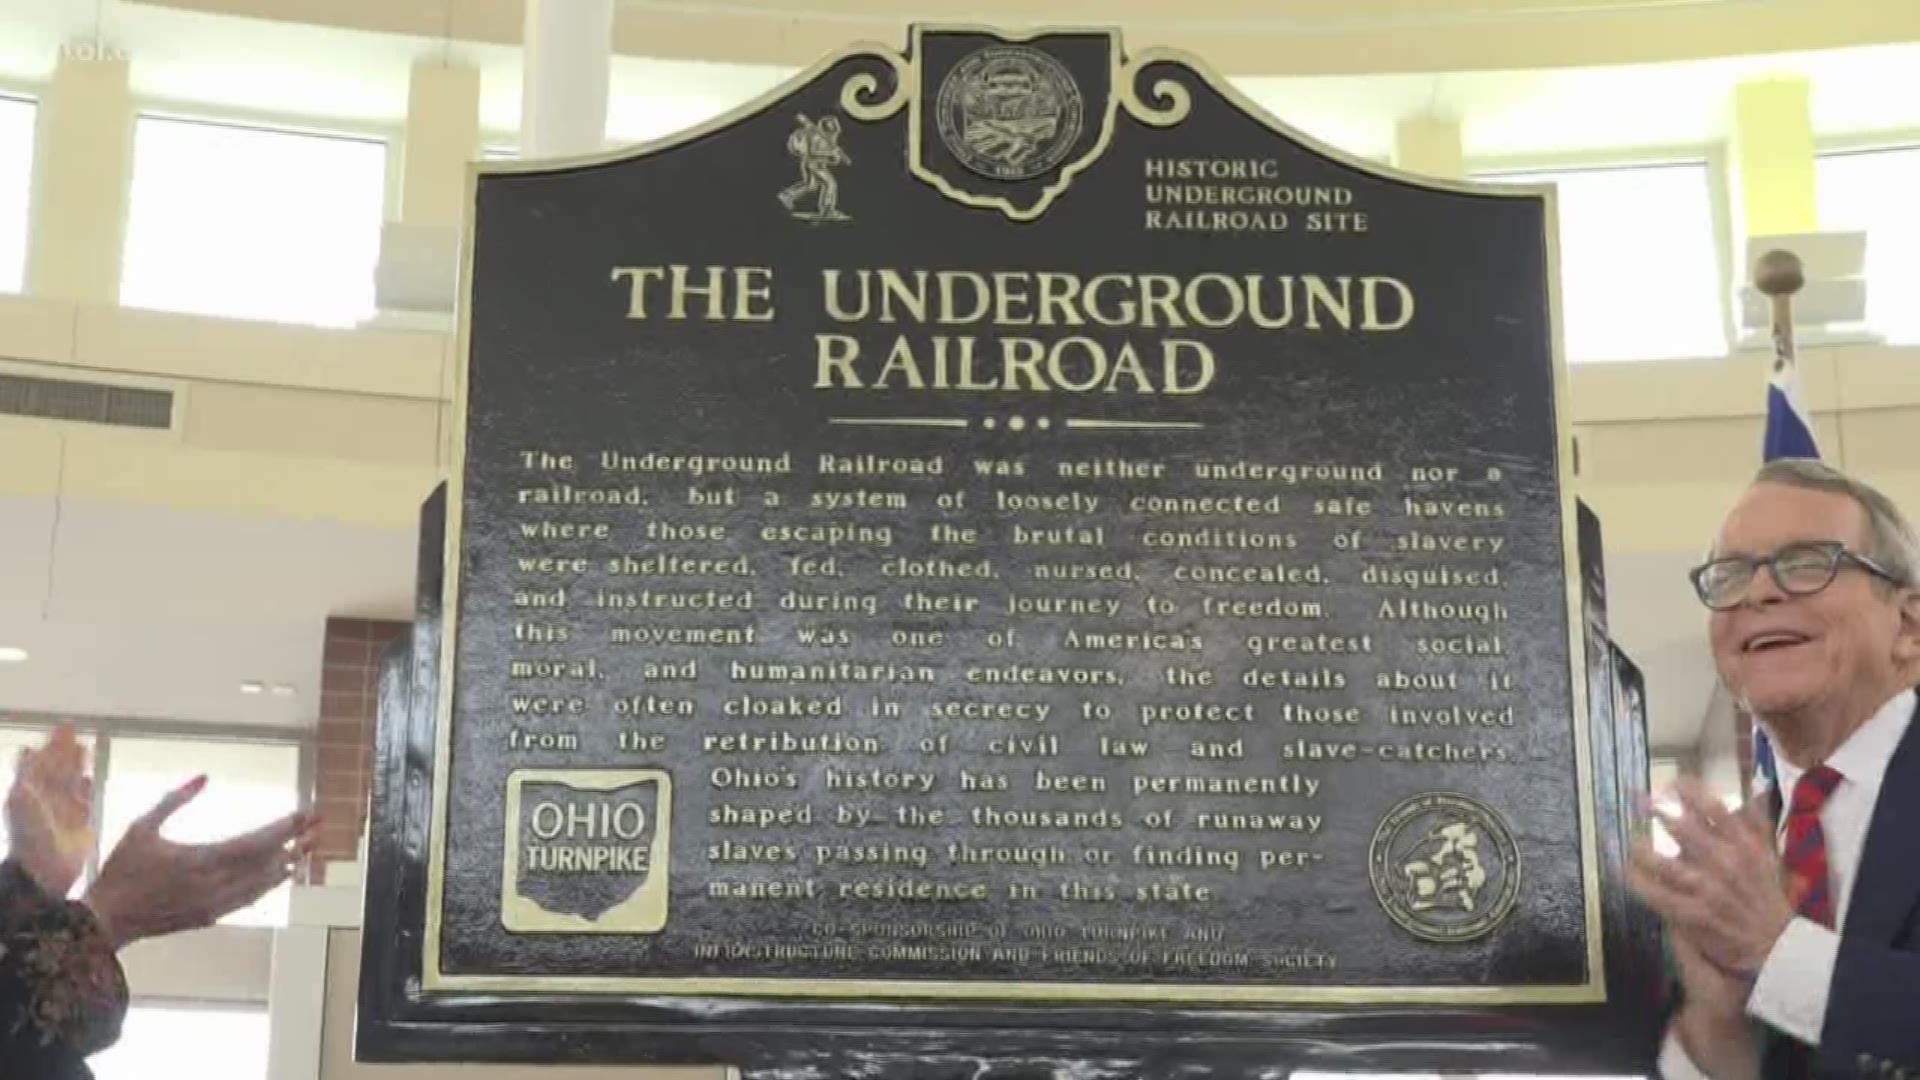 An estimated 40,000 escaped slaves passed through Ohio's portion of the Underground Railroad.